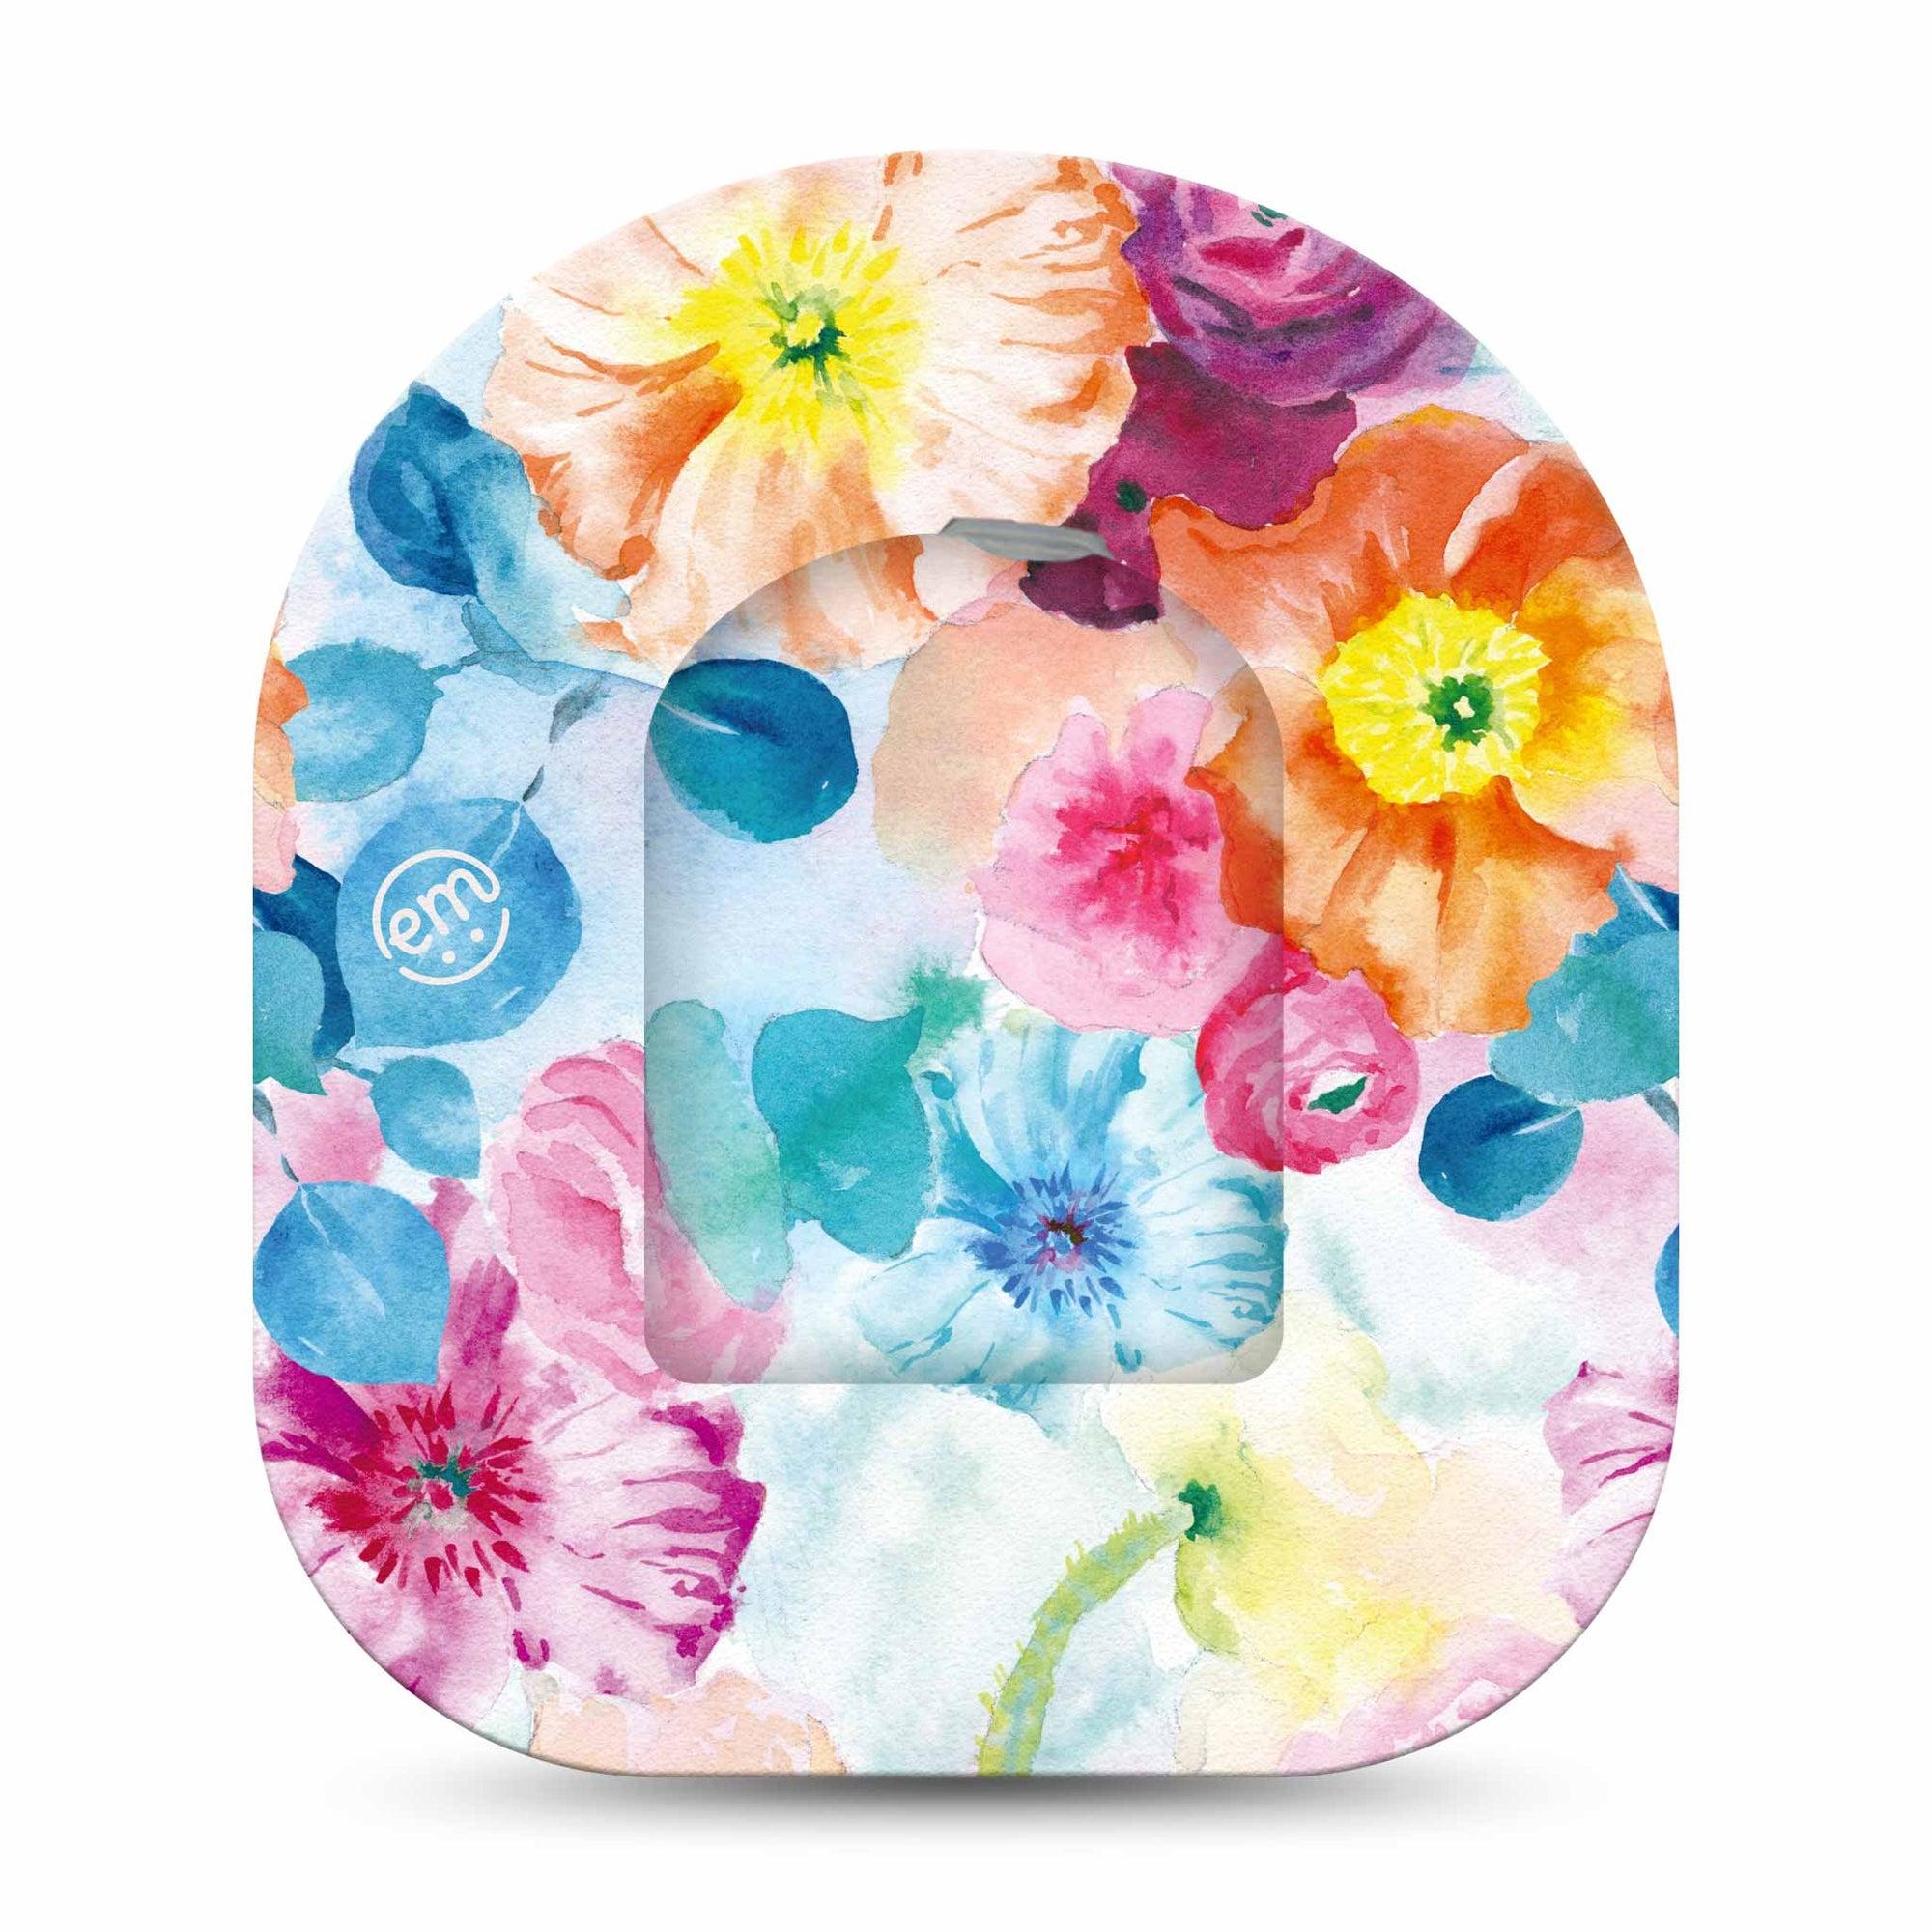 ExpressionMed Watercolor Poppies Omnipod Full Wrap Center Sticker and Mini Tape Garden Flower Inspired Vinyl Sticker and Tape Design Pump Design